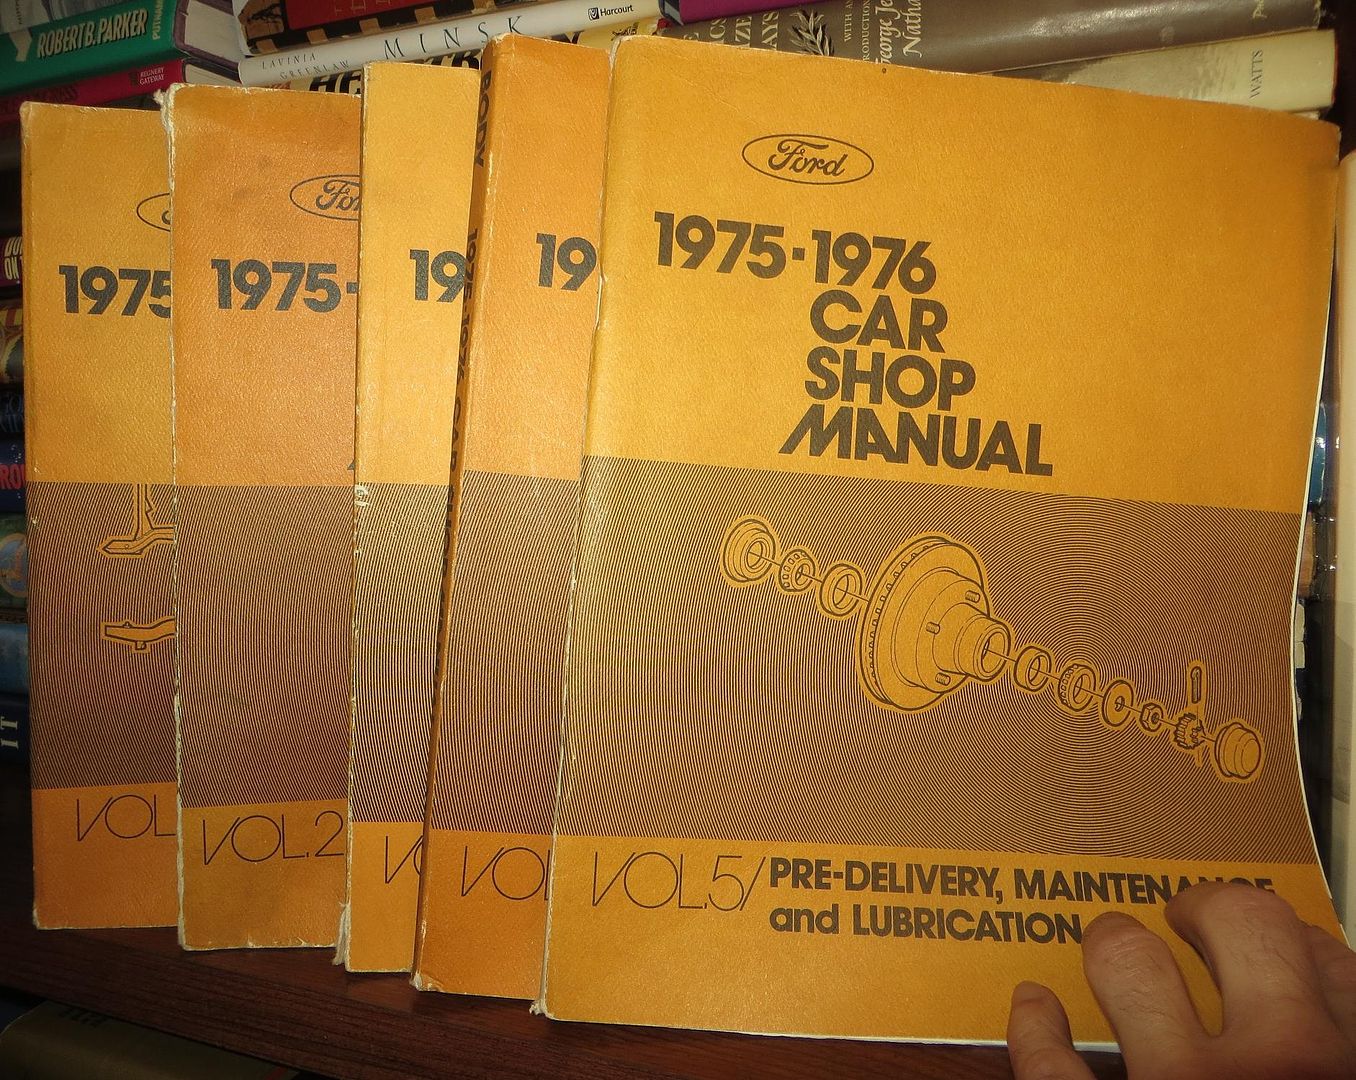 FORD MOTOR CO. - 1975-1976 Car Shop Manual Five Volume Set: Chassis, Engine, Electrical, Body & Pre-Delivery, Maintenance and Lubrication